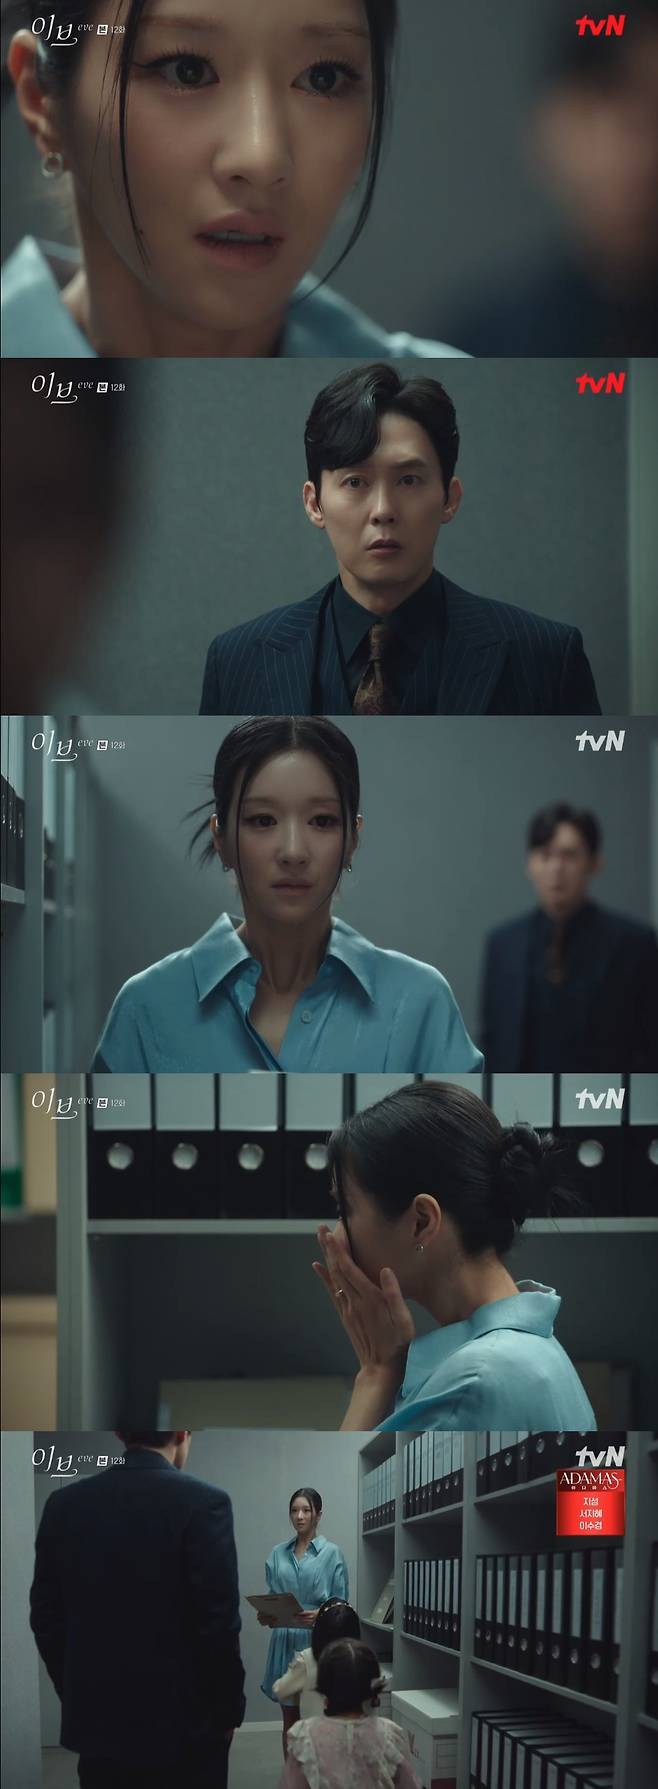 In the TVN drama Eve, which was broadcast on the 7th, Han Sora (Yoo Sun) found out the identity of Lee Se-ye-ji and informed her husband Kang Yoon-gyeom (Byeong-eun Park).On the same day, Han Sora detained Jang Moon-hee (Lee Il-hwa) after kidnapping him.In this process, Jang Mun-hees daughter found out that she died working as an LY semiconductor researcher, Han Sora asked her relationship with Sean Gelael and said, Did you approach it on purpose?I do not think it is the same researcher, but I have been revenge because it is unfair to die. Sora, who became aware of the revenge of Jang Moon-hee and Lee Sean Gelael, went to see Lee Sean Gelael, who approached him with Kim Sun Bin, and called him Sean Gelael.After that, Sora went to Kang Yoon-gum with the previous agreement with Sean Gelael and said, You should thank me.At this time, I looked at this Sean Gelael and said, What are you doing?You dont know who this woman is, Ill let you know, Han Sora told Kang Yoon-kyum. Its no use saying that.Stop it, and one Sora, who ignored it, said, Its a high school admission photo of Kim Sun Bin, but his name is different. Sean Gelael.A photo taken by Sora reads Sean Gelael on Kim Sun Bins name tag.Kang looked at him suspiciously and heightened his tension.At this time, Kang Yoon-kyum told Lee Sean Gelael, who is looking at the documents, What are you doing? Im asking what youre doing.Lee Sean Gelael wiped his tears and looked at Kang Yoon-gum and said, When did you come? Kang Yoon-gum doubted, How did you open the safe ... how did you open it?I was hiding and searching, and (Yoon-gums daughter) Dabi came in here, and I was organizing because I was afraid of dropping the documents and getting hurt by you, Lee said, avoiding the crisis.In the situation where Kang Yoon-kyums suspicions deepened, Identity of Sean Gelael, which Han Sora revealed, raised questions about the development to be unfolded in the future.